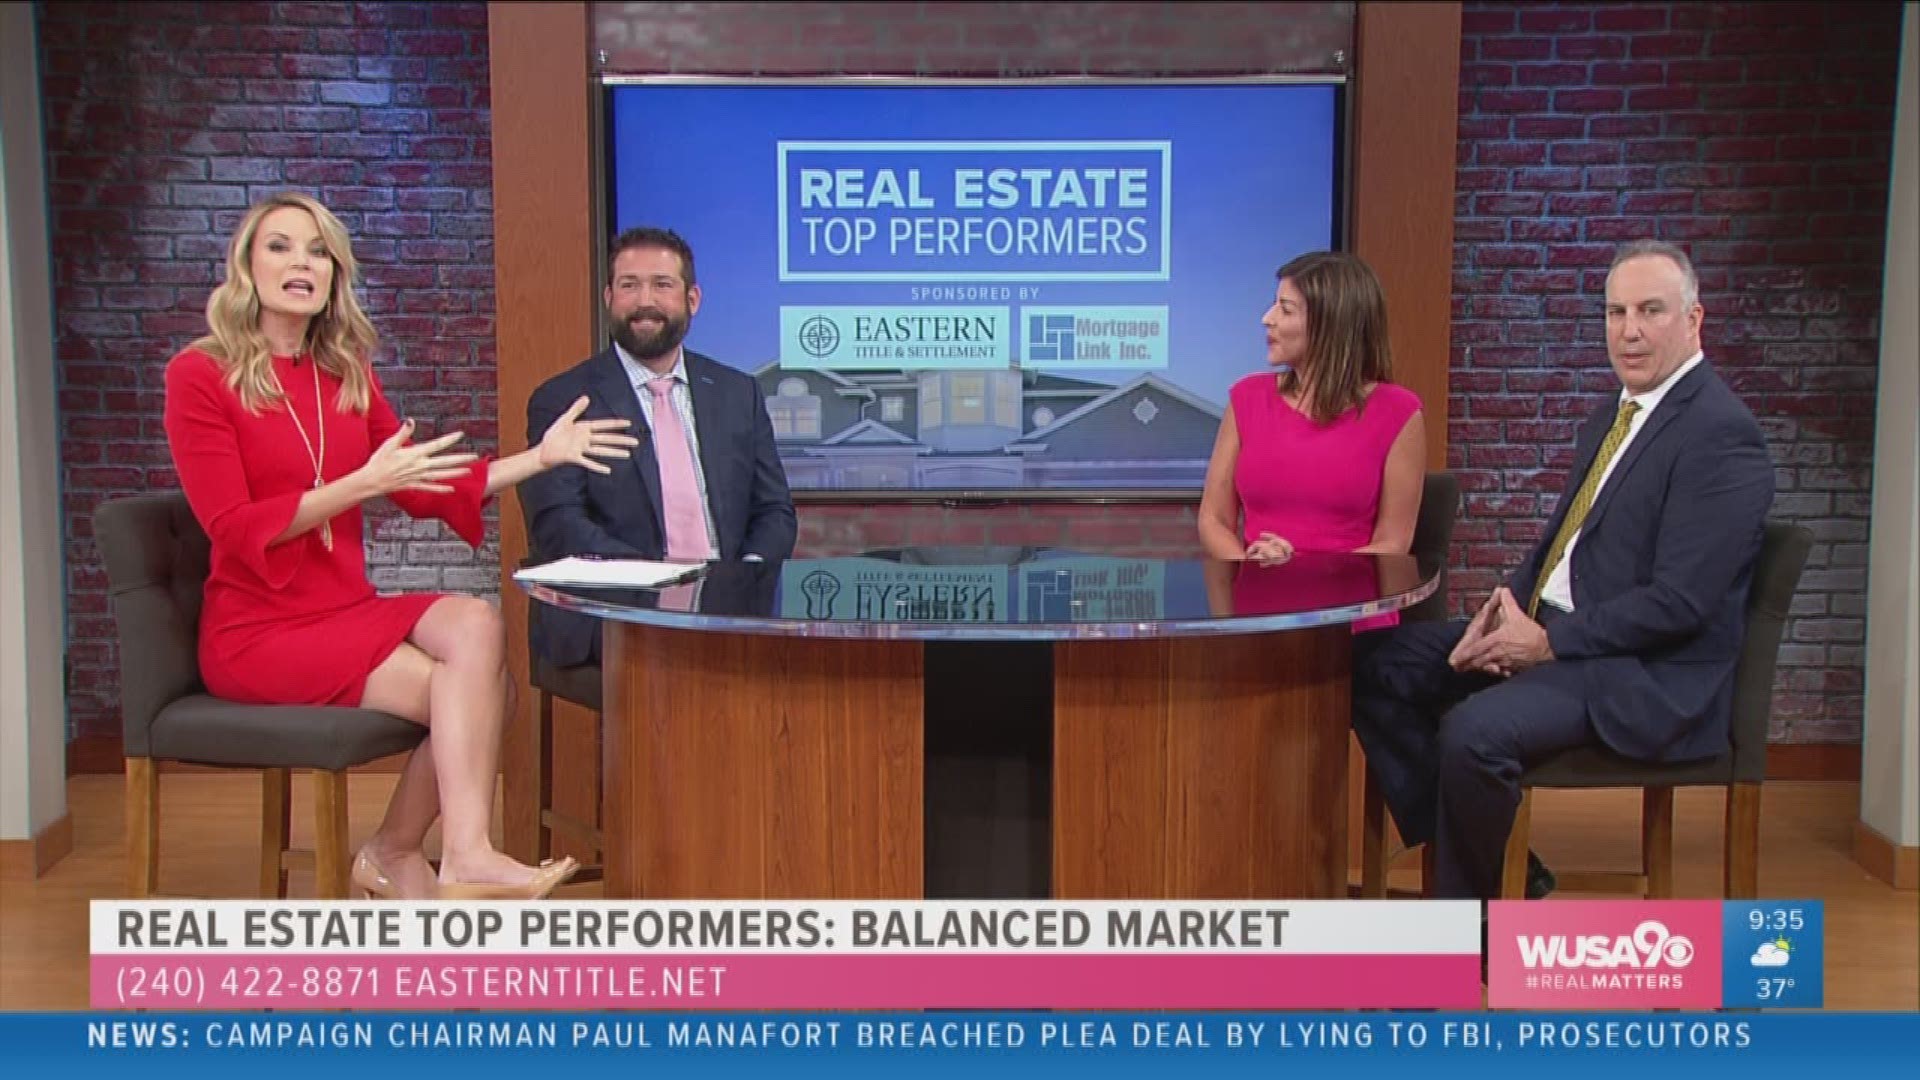 The Real Estate Top Performers explain how this unique market is beneficial to both buyers and sellers alike!  If you are looking to buy or sell, contact the Real Estate Top Performers at (240) 422-8871 or visit EasternTitle.Net.